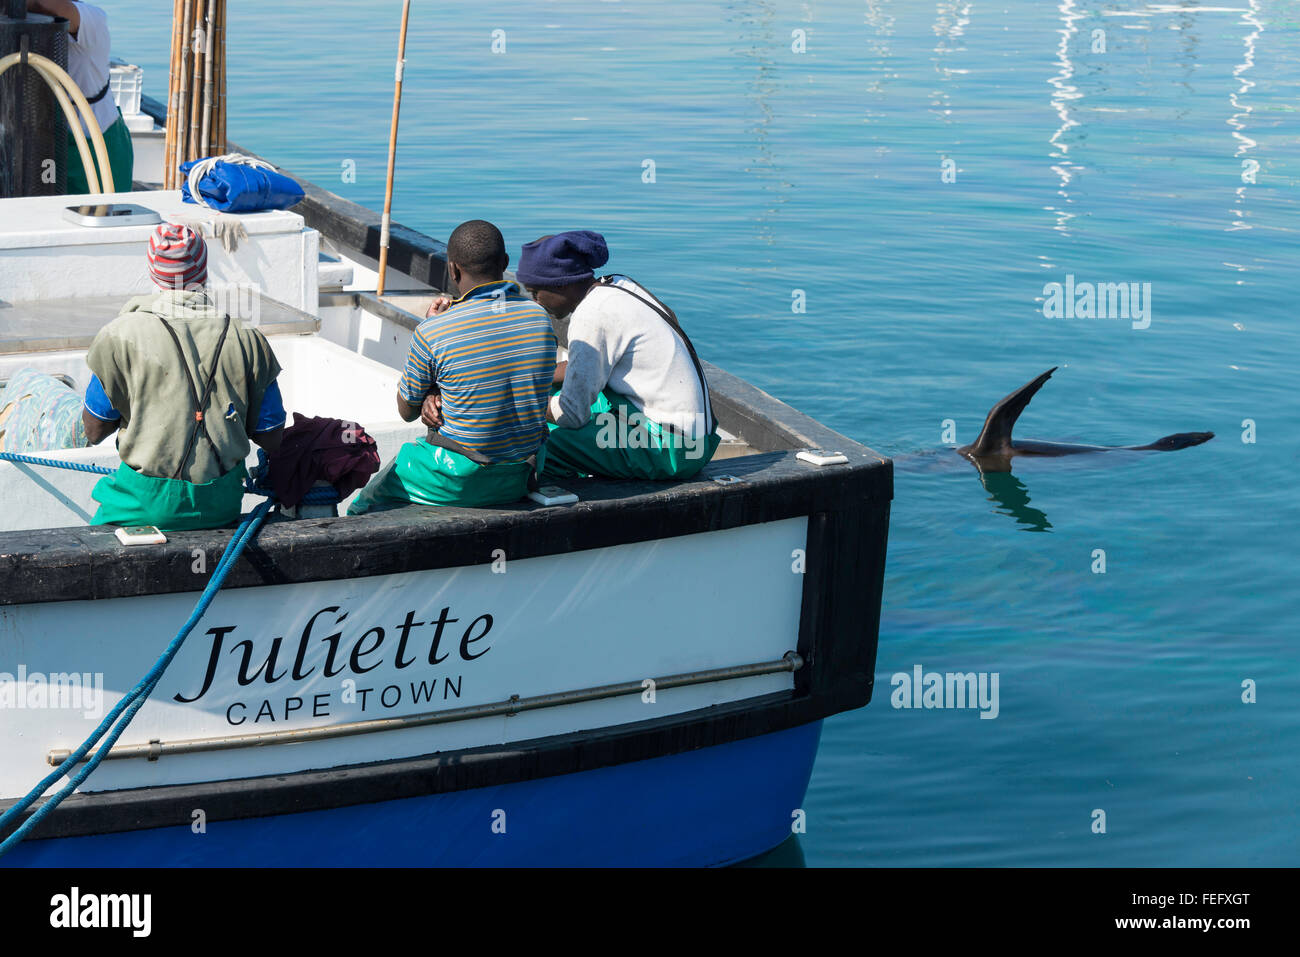 Seal swimming by fishing boat, Hout Bay, Cape Peninsula, City of Cape Town Municipality, Western Cape Province, South Africa Stock Photo